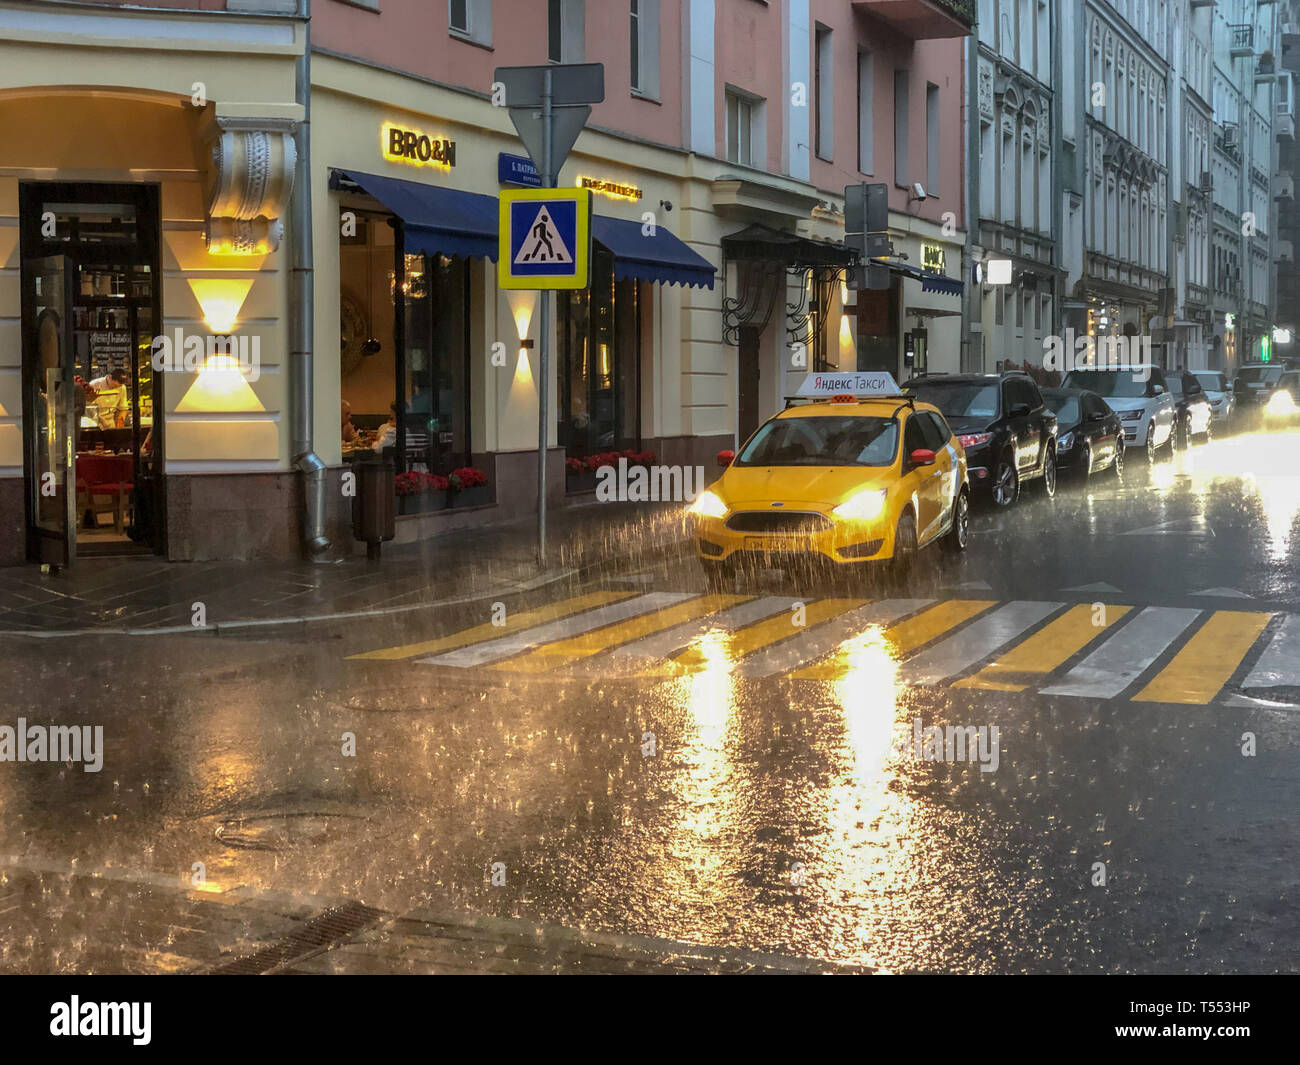 Moscow, Russia - July 19, 2018: Taxi on a rainy day in Patriarshiye Ponds, an affluent residential area in downtown Presnensky District of Moscow, Rus Stock Photo